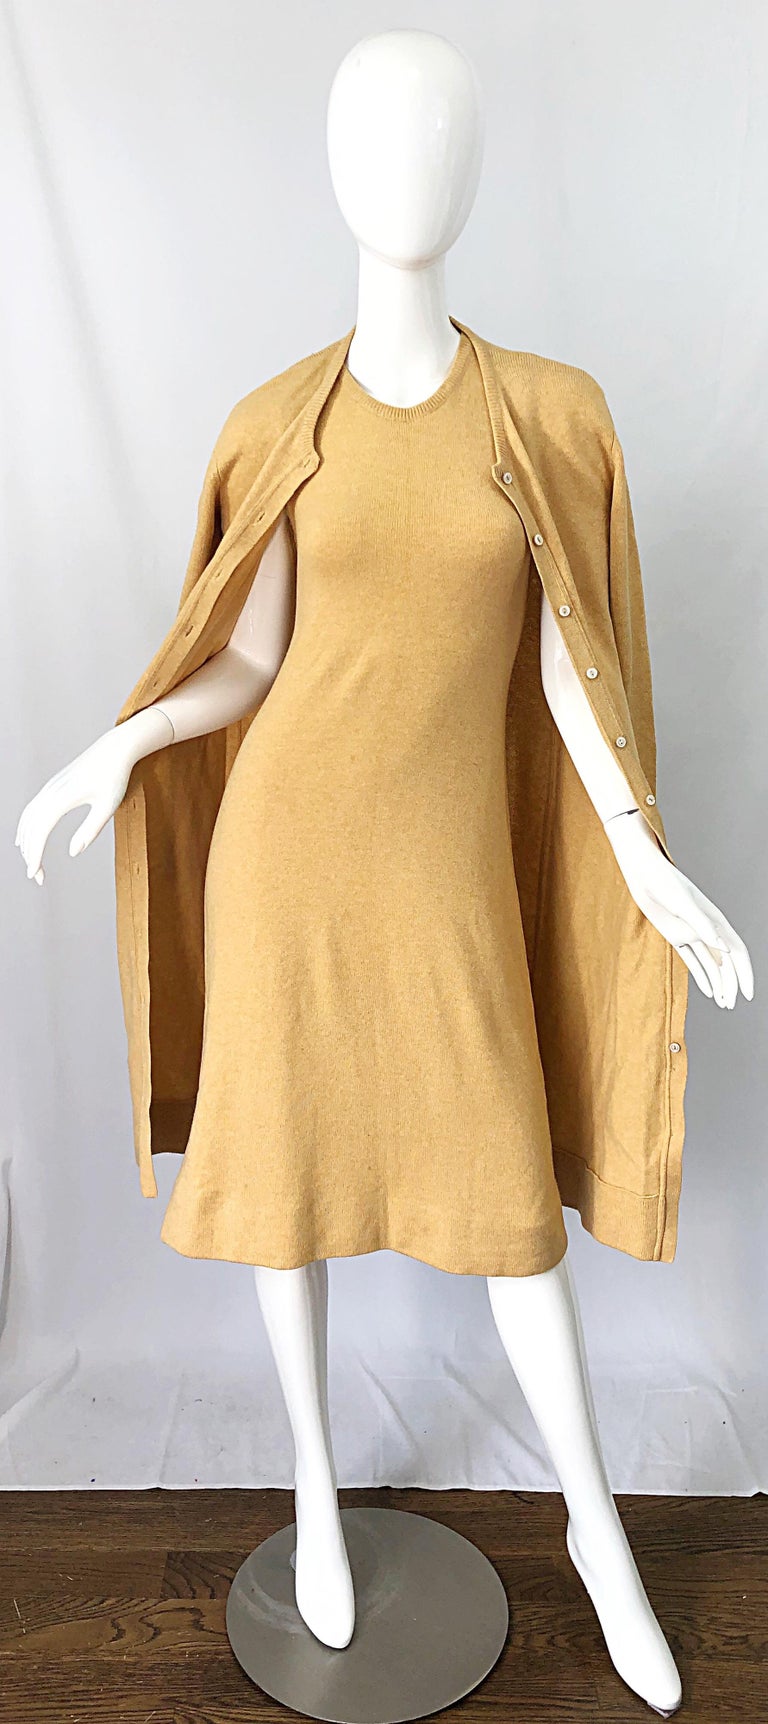 1970s HALSTON Cashmere Camel Tan 70s Vintage Dress and Cardigan Sweater Jacket For Sale 7